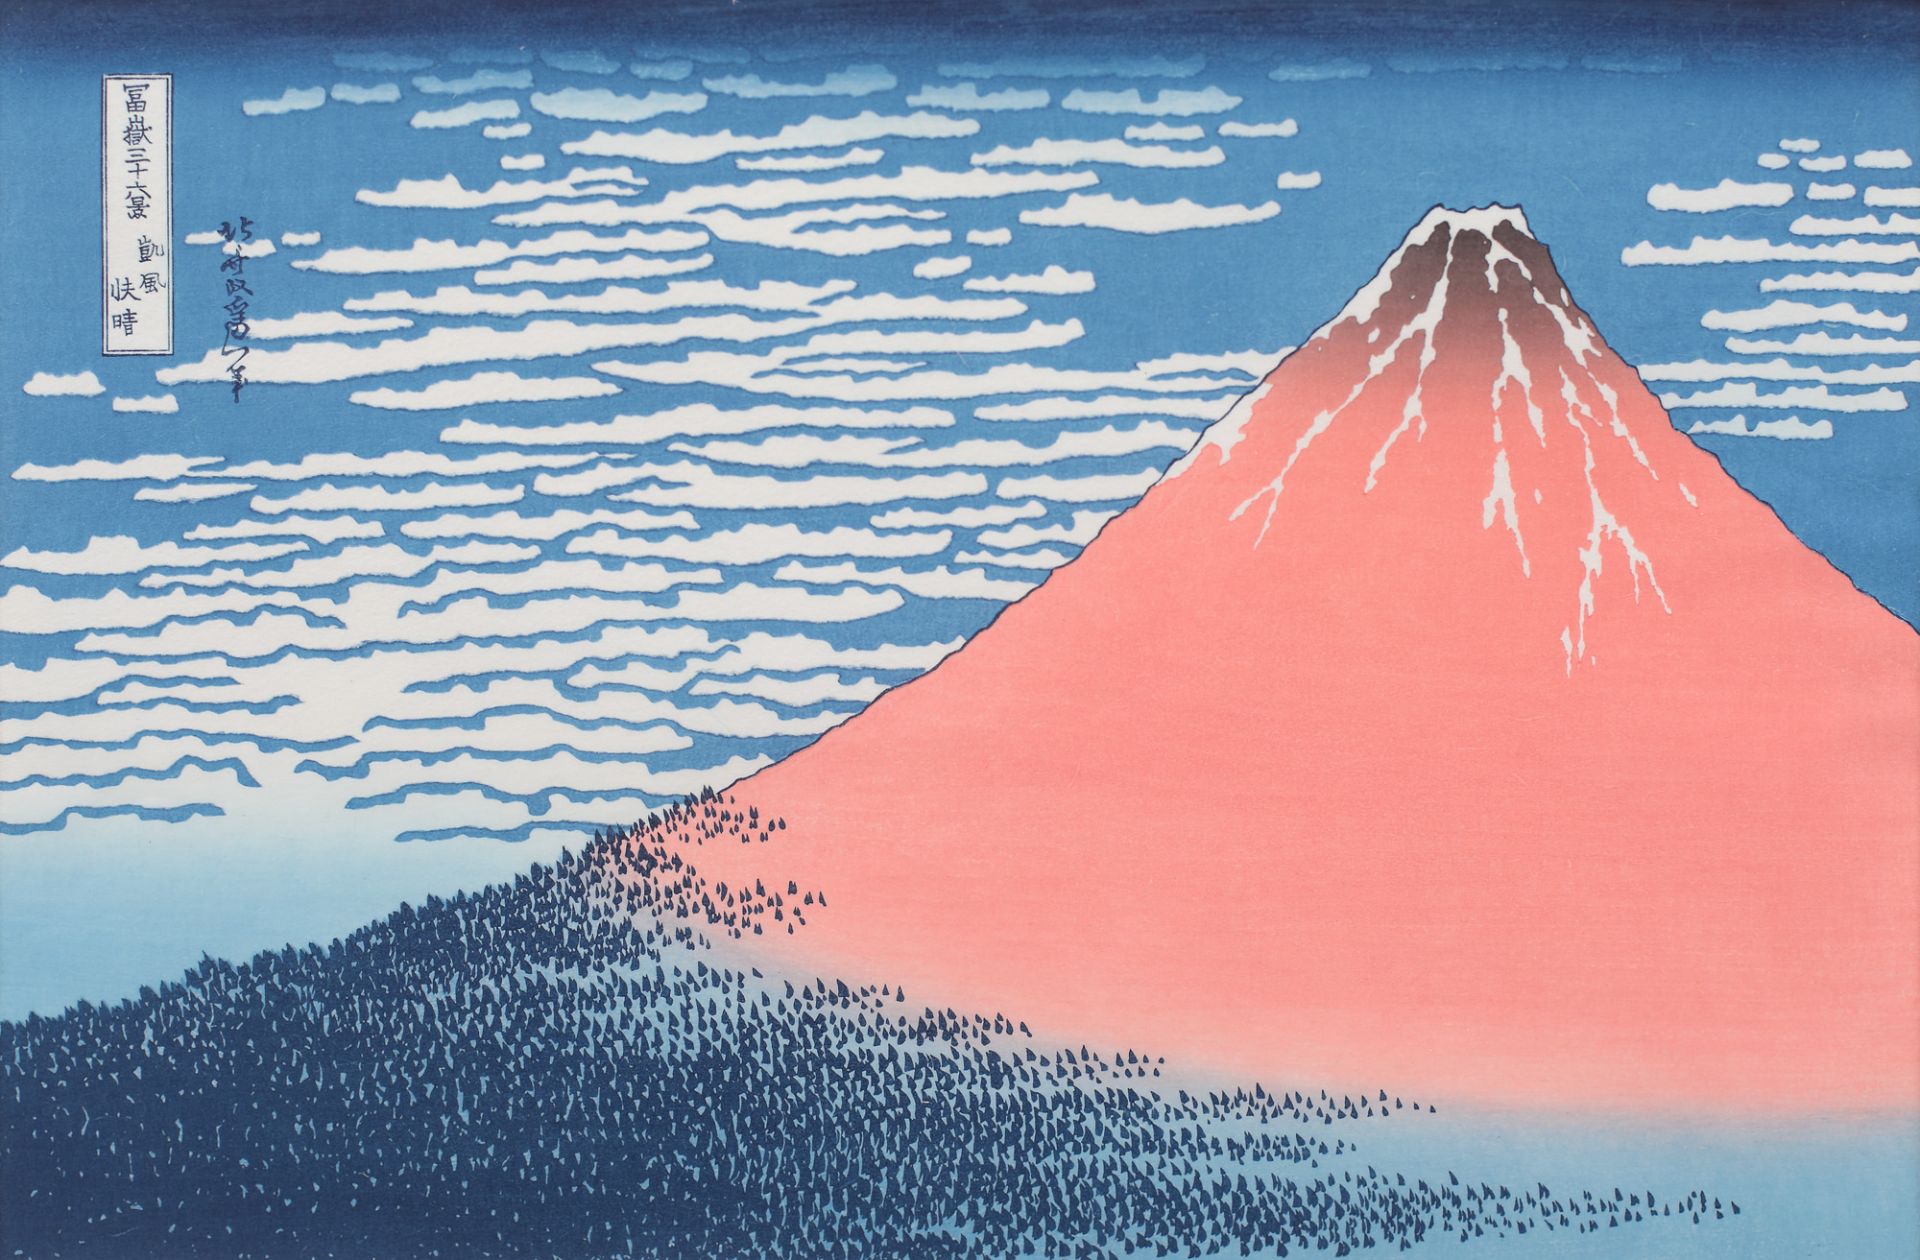 Red Fuji from the series "The 35 views of Mount Fuji"